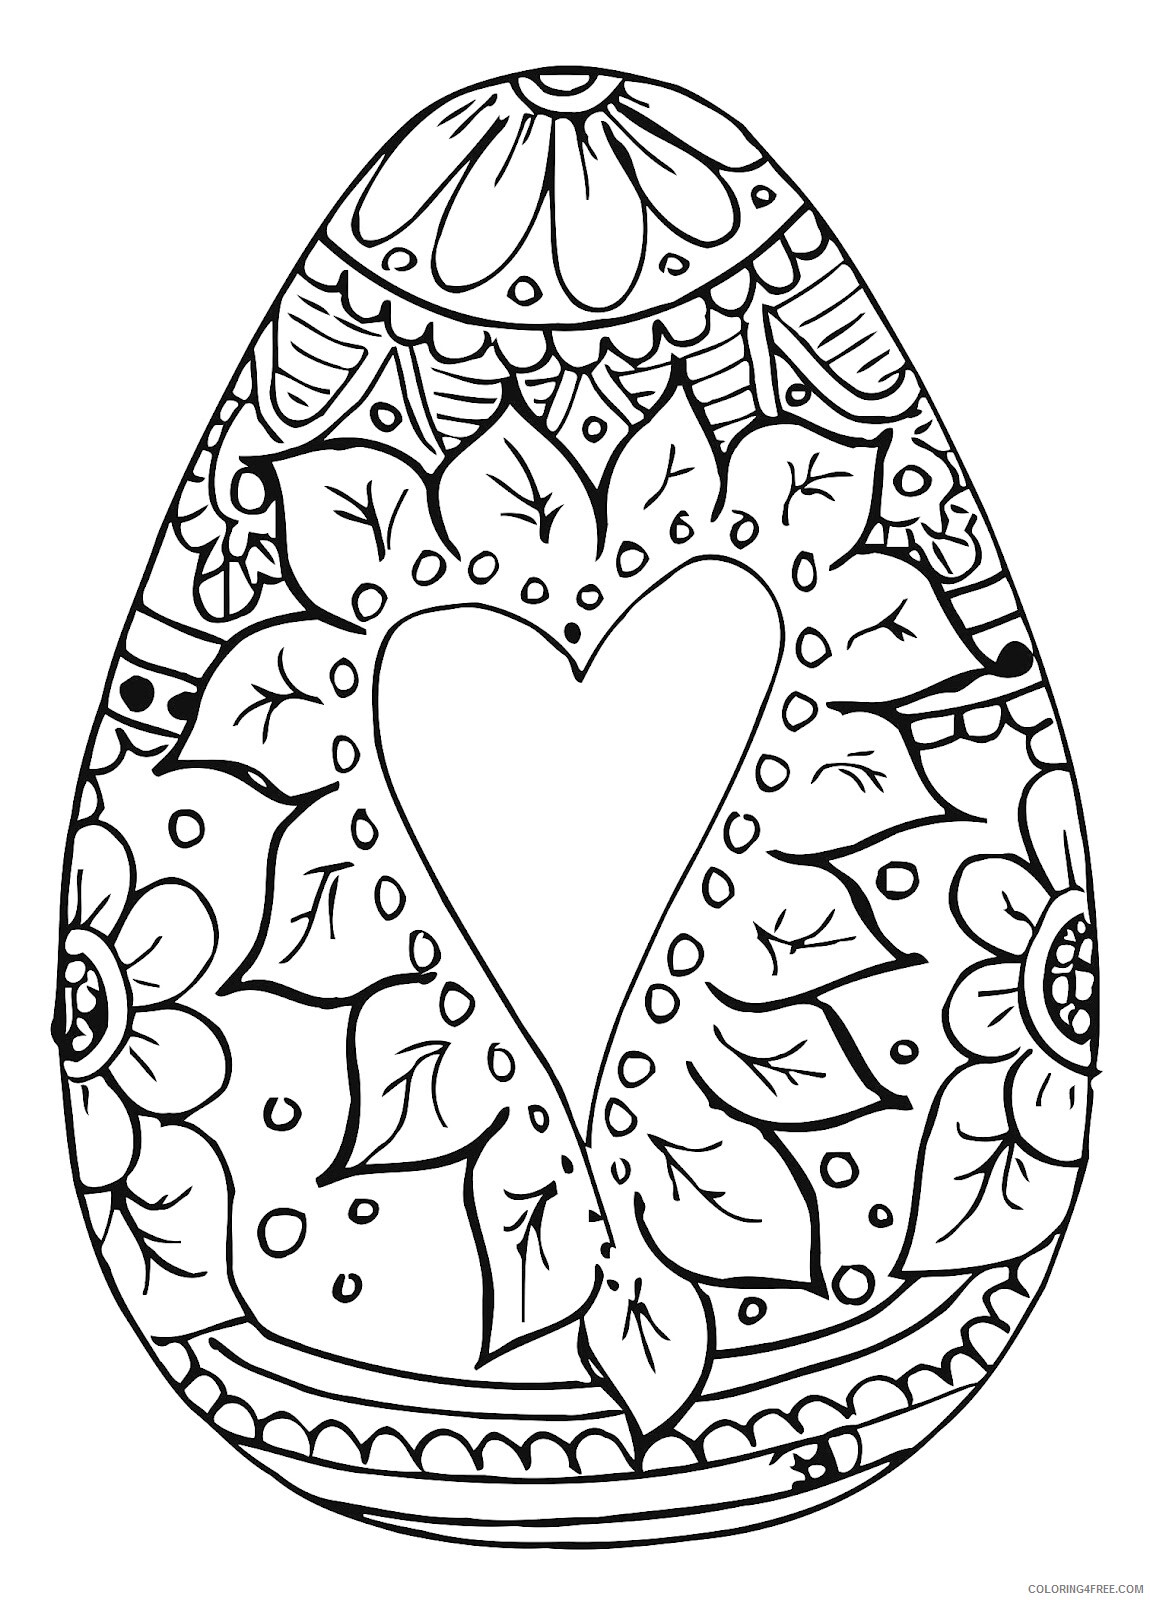 Zentangle Coloring Pages Easter Egg Design Printable 2020 041 Coloring4free